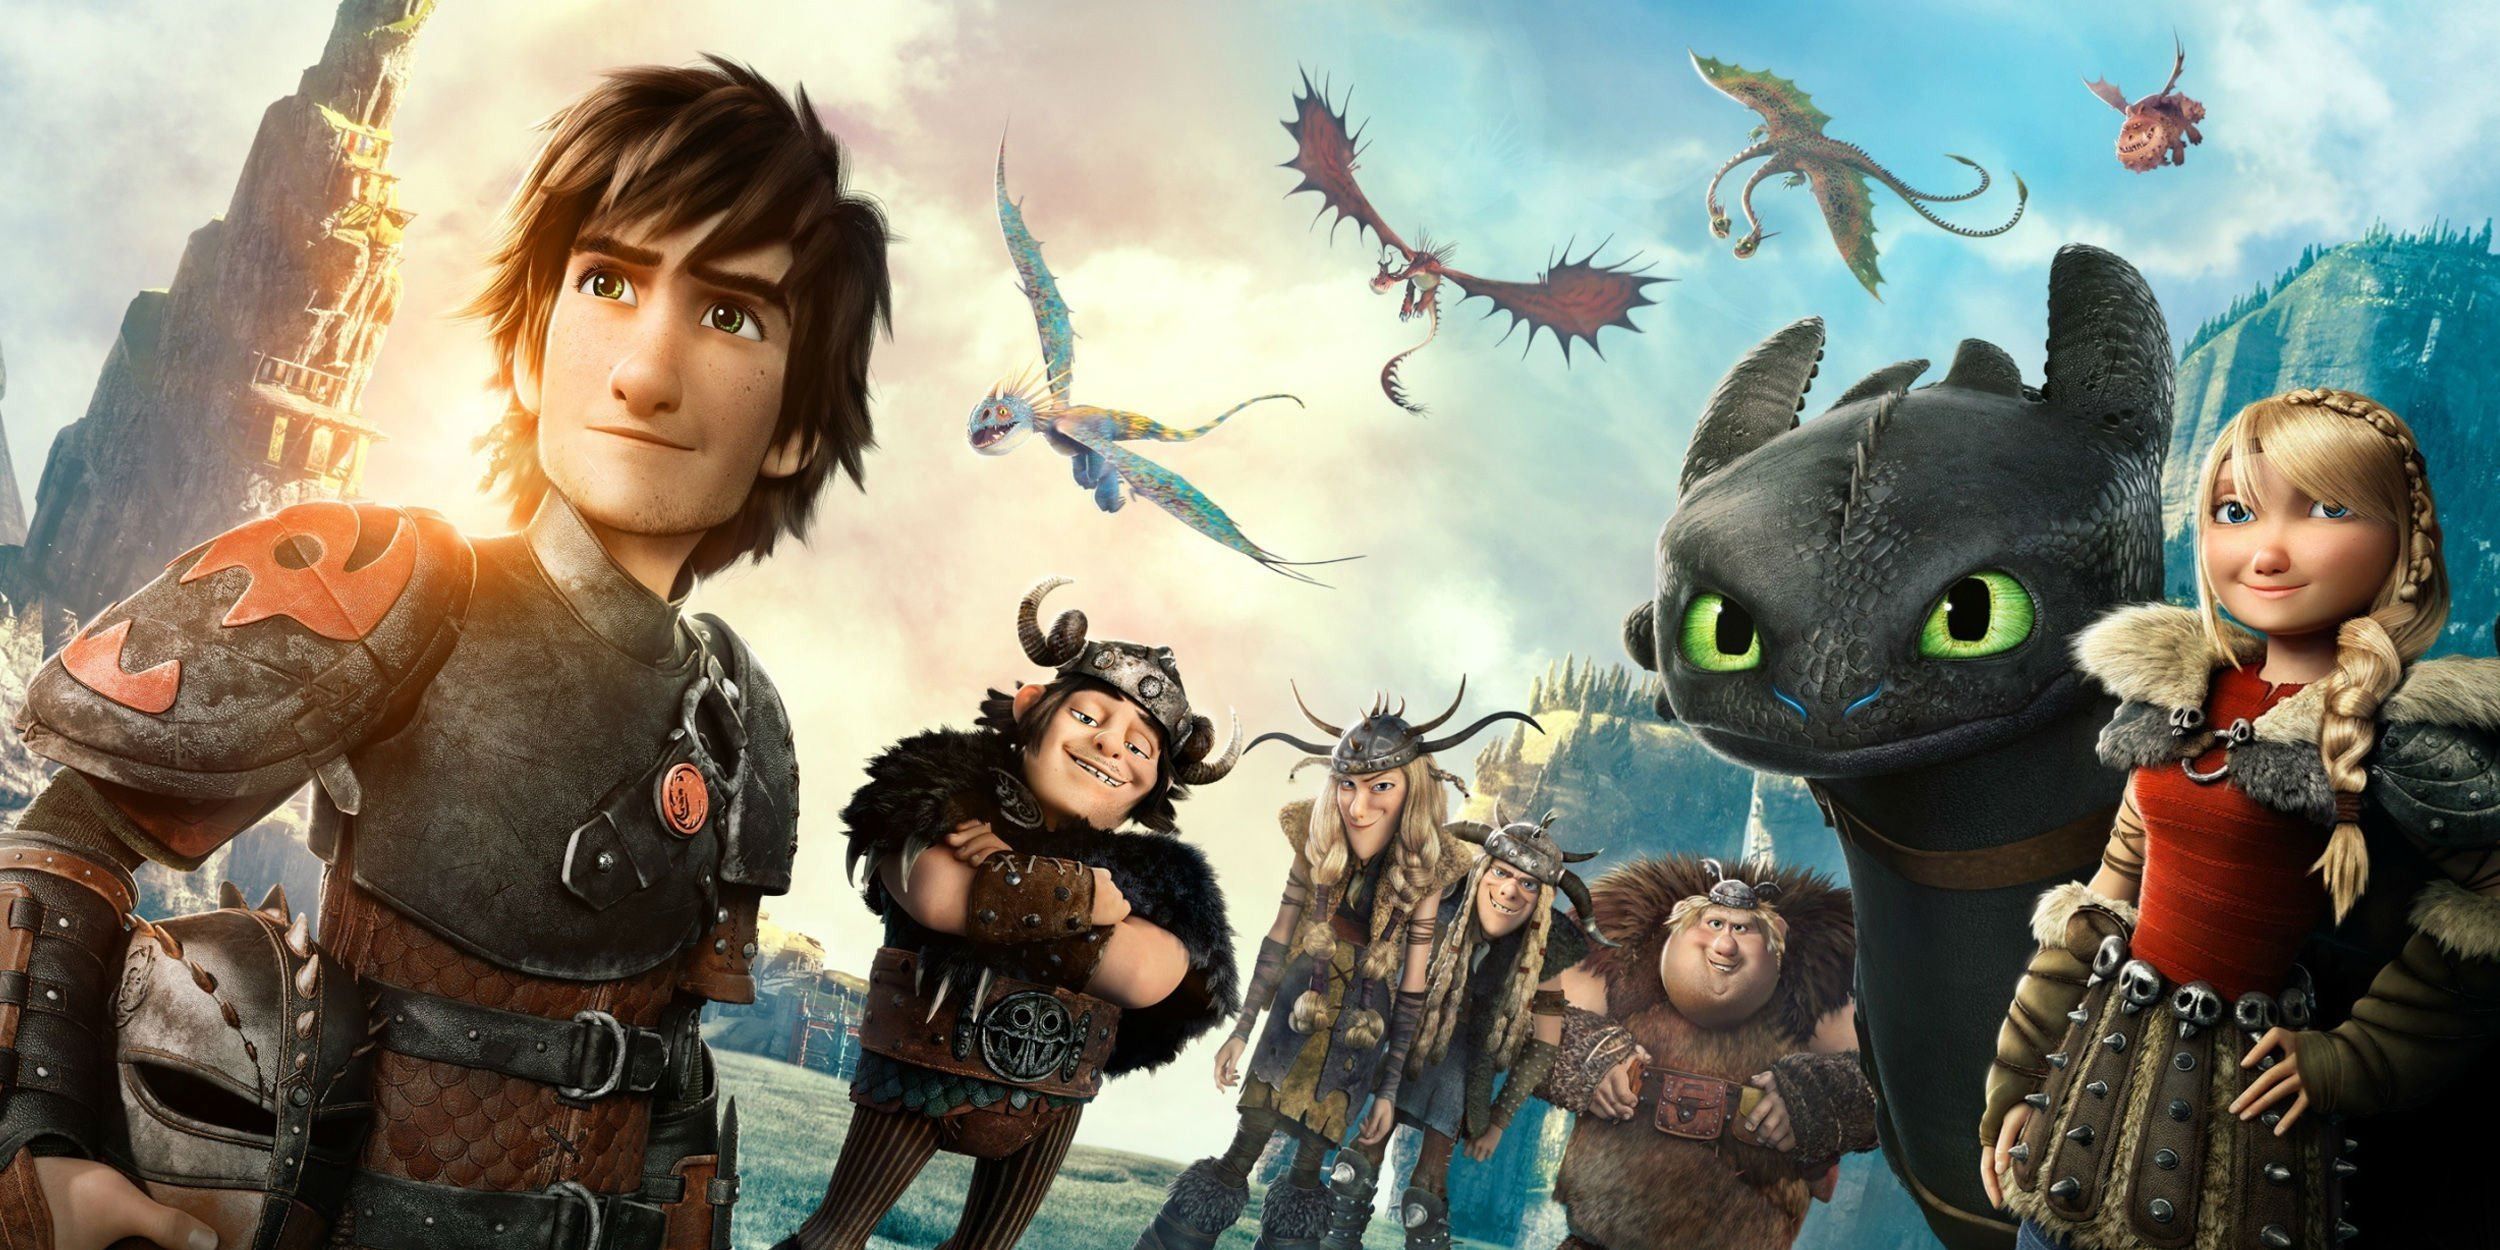 How To Train Your Dragon 3 Voice Cast & Character Guide